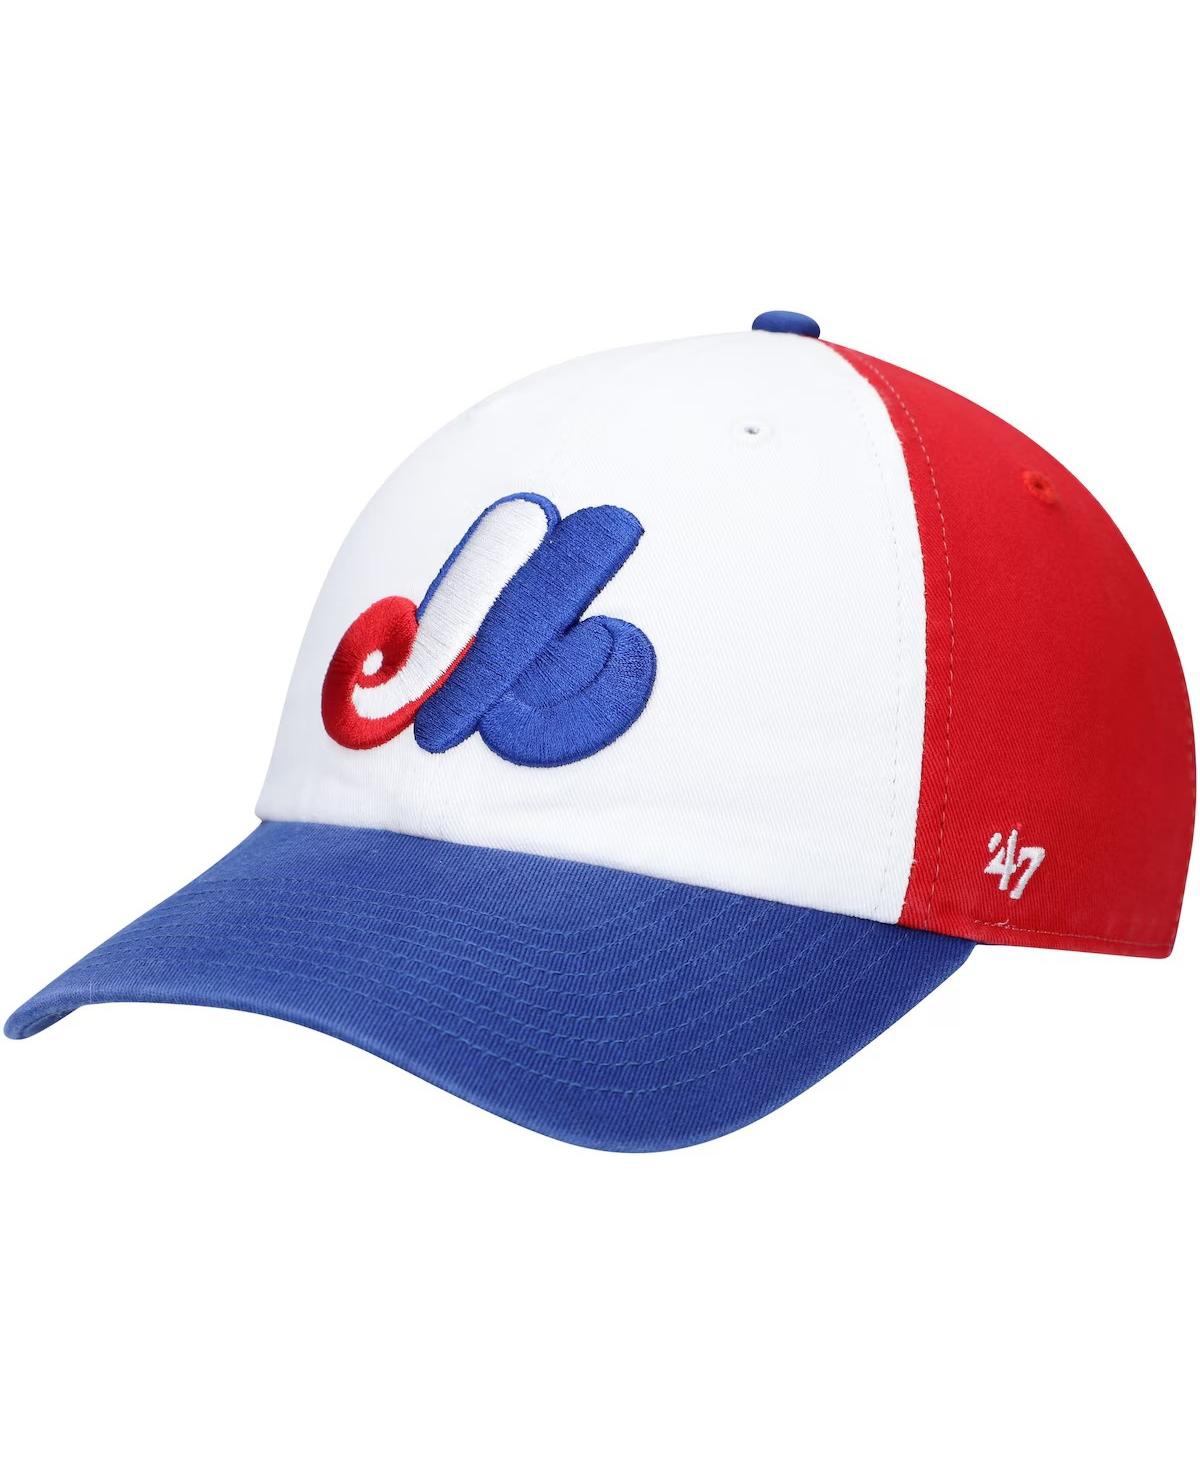 Men's White Montreal Expos Logo Cooperstown Collection Adjustable Hat - White, Royal